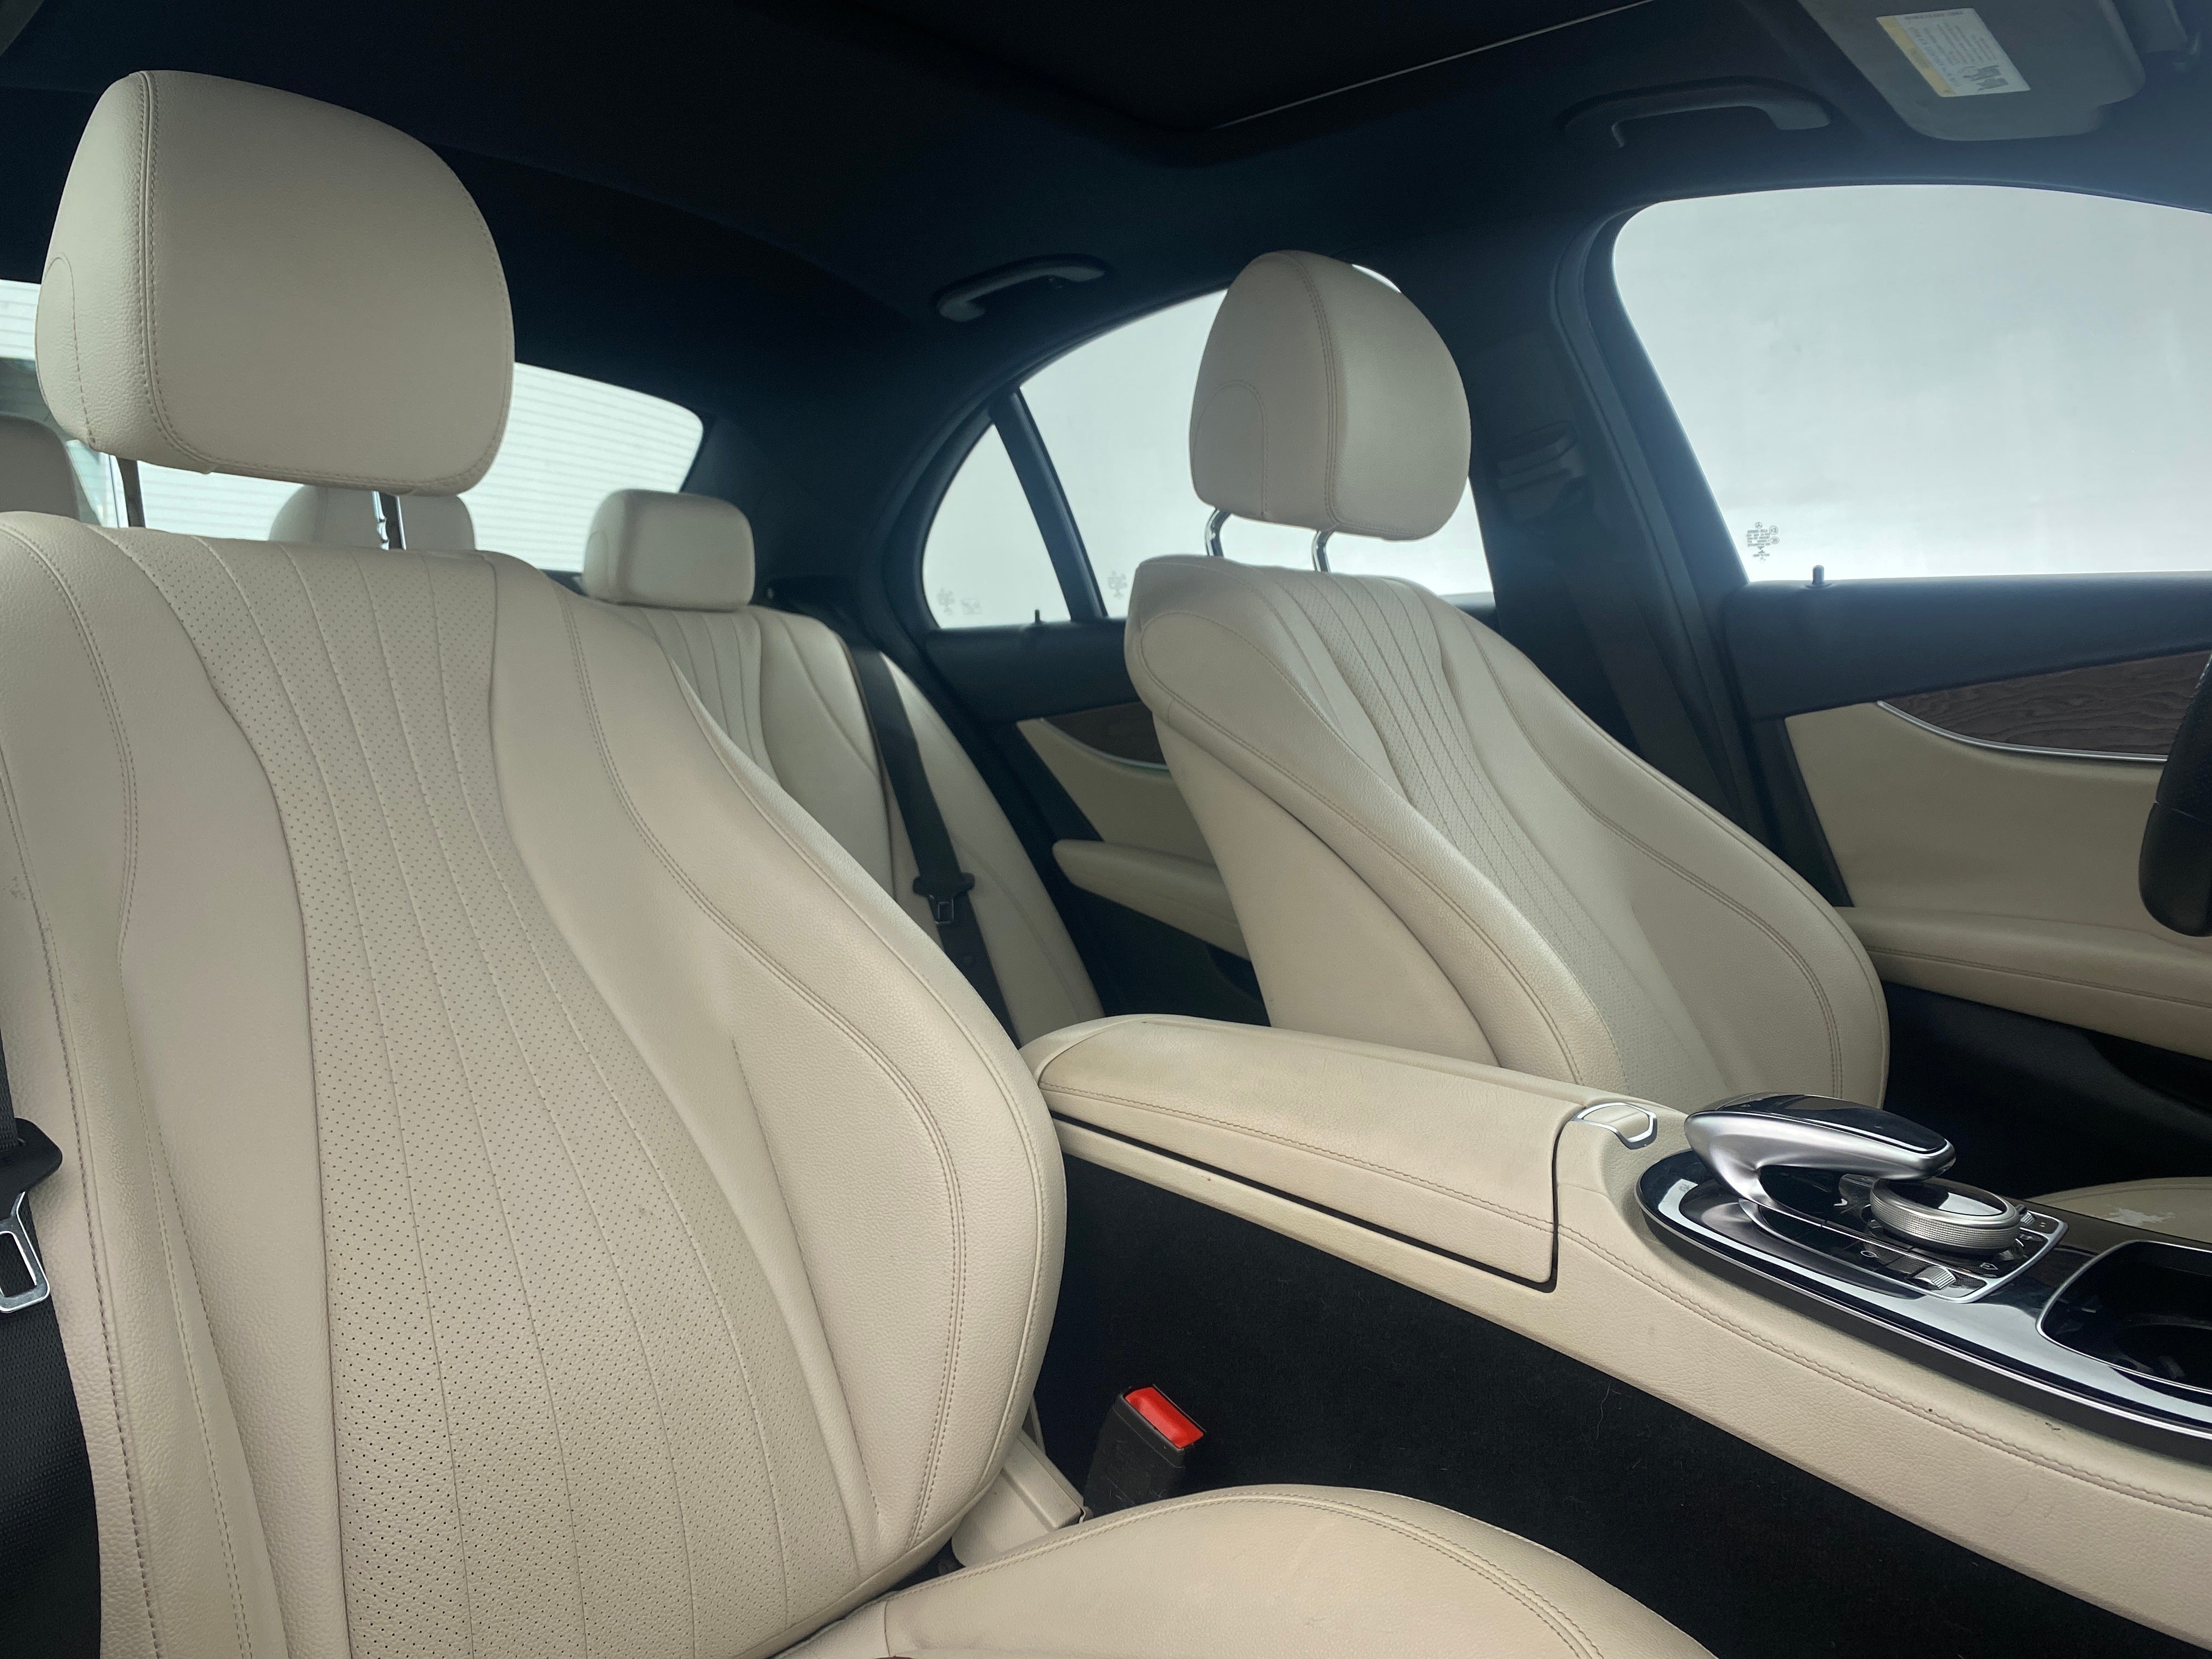 Mercedes-Benz Features: Heated Car Seats